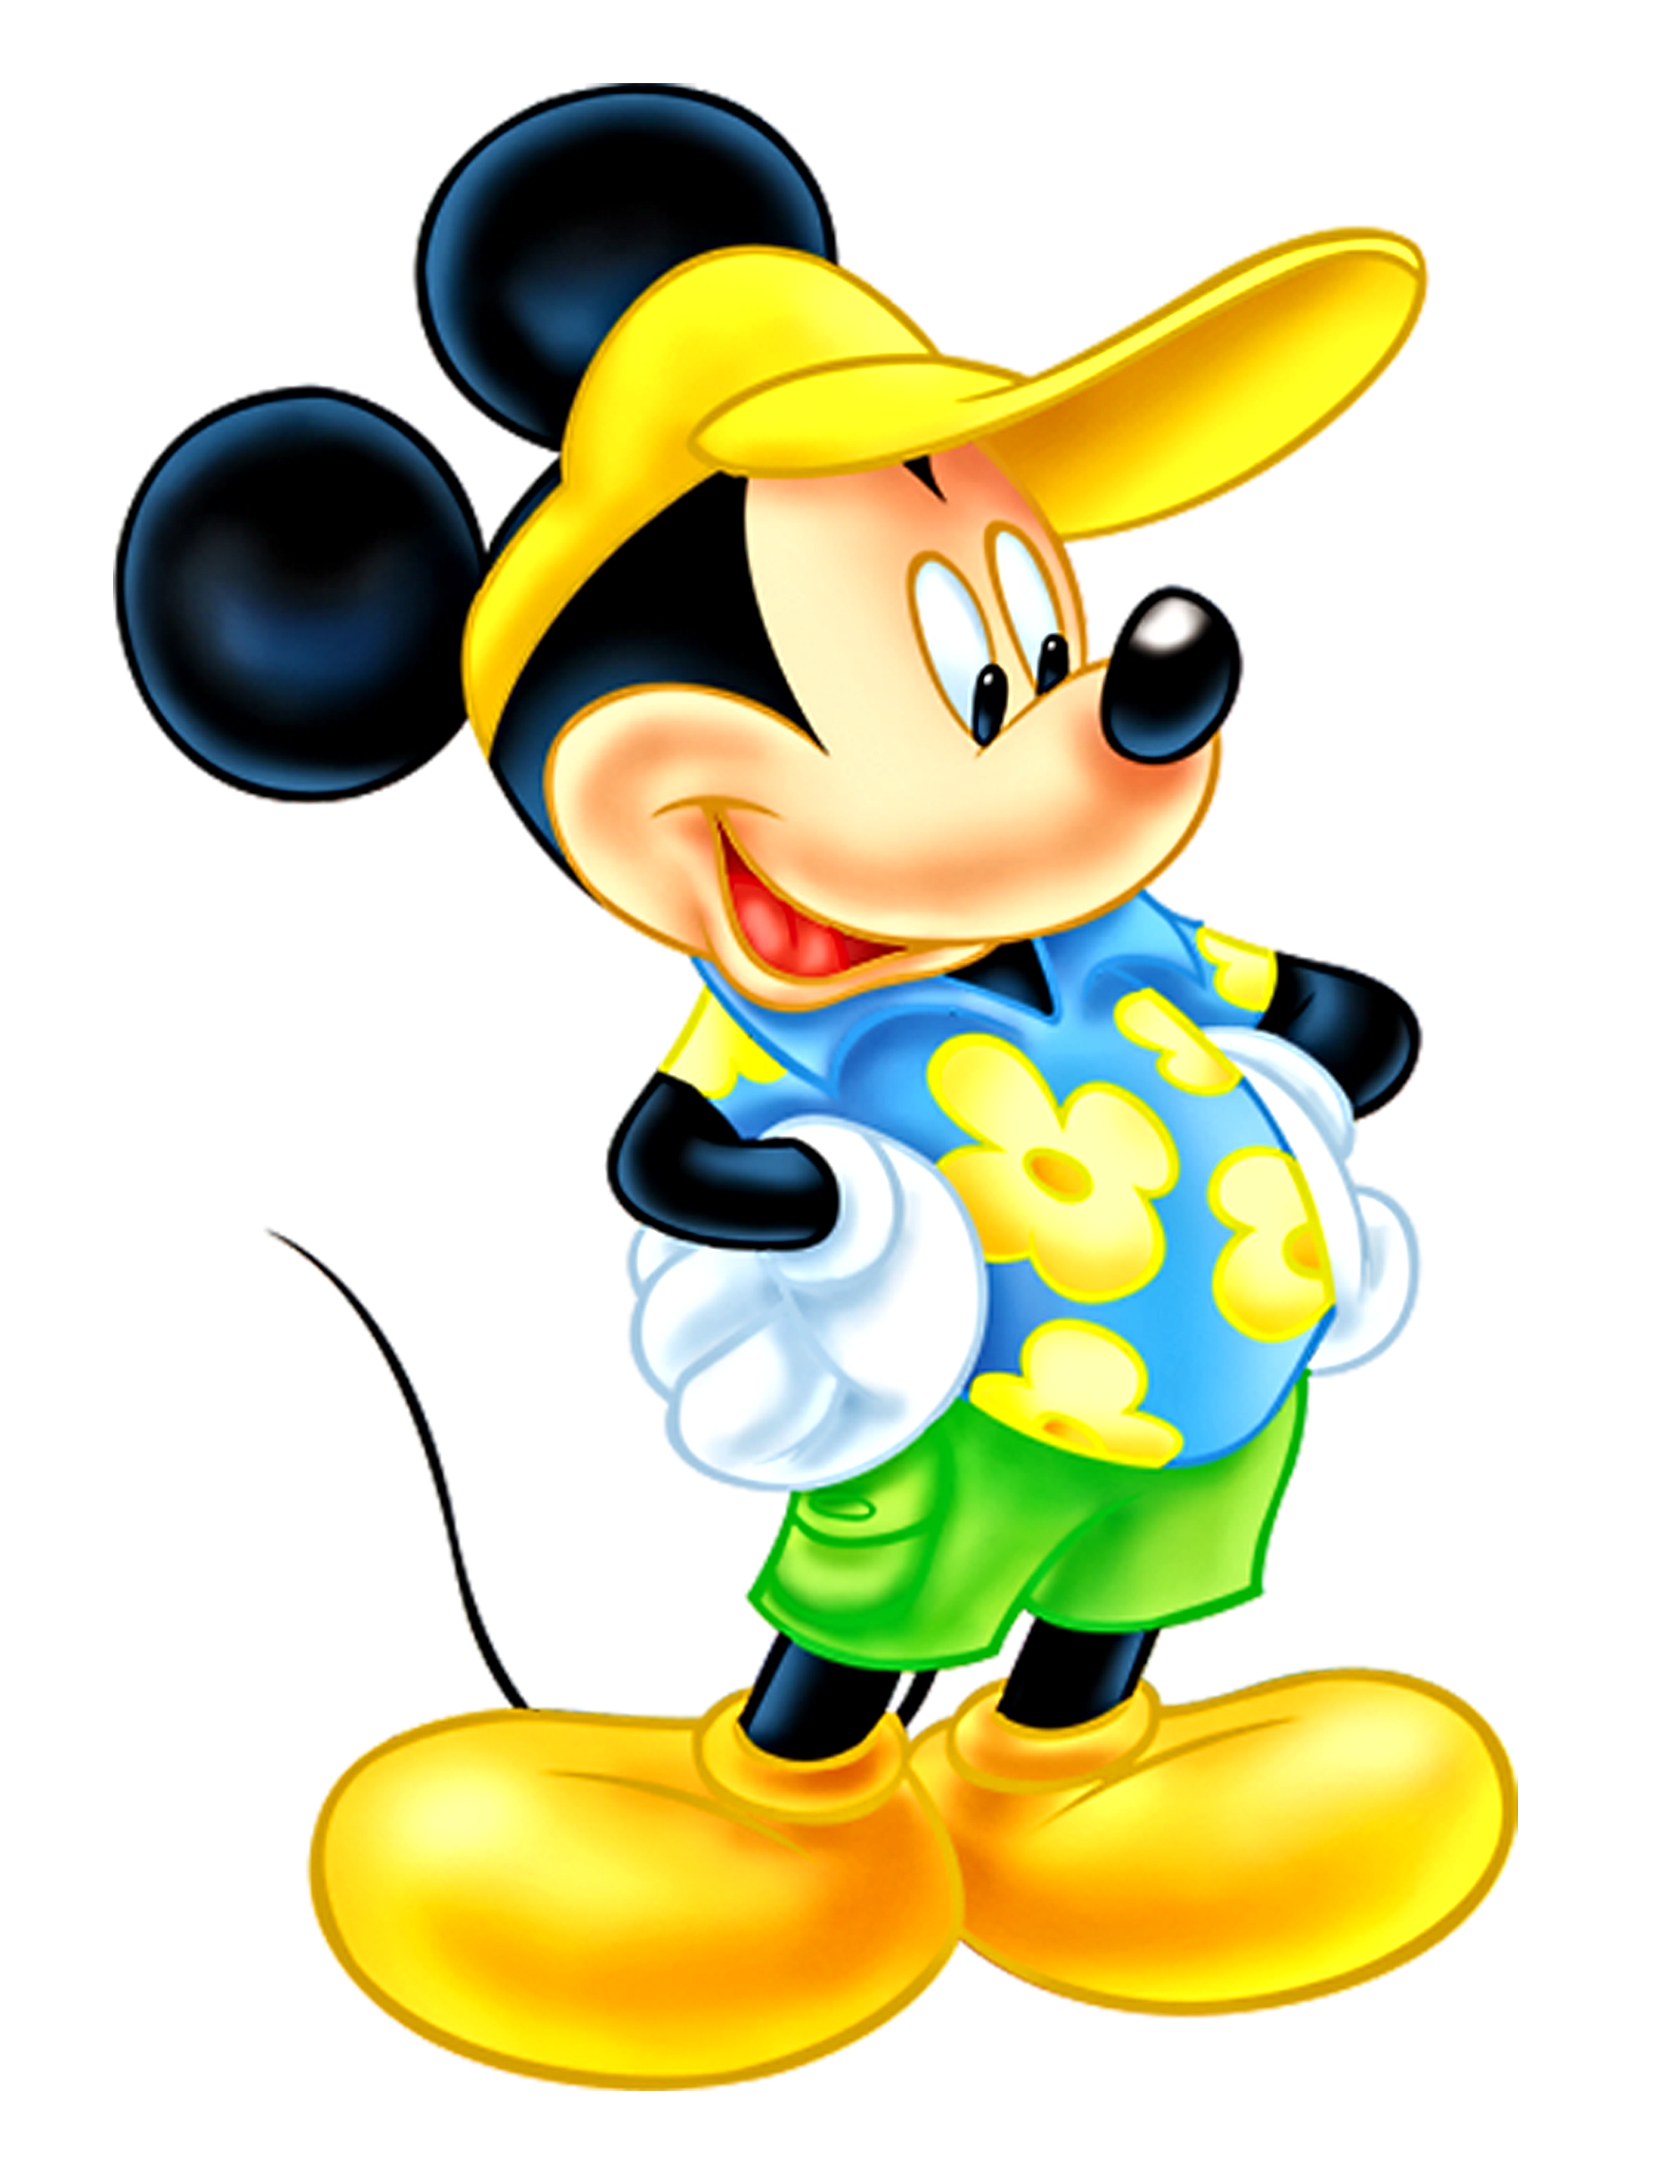 Lamp clipart hindu puja. Mickey mouse highres png